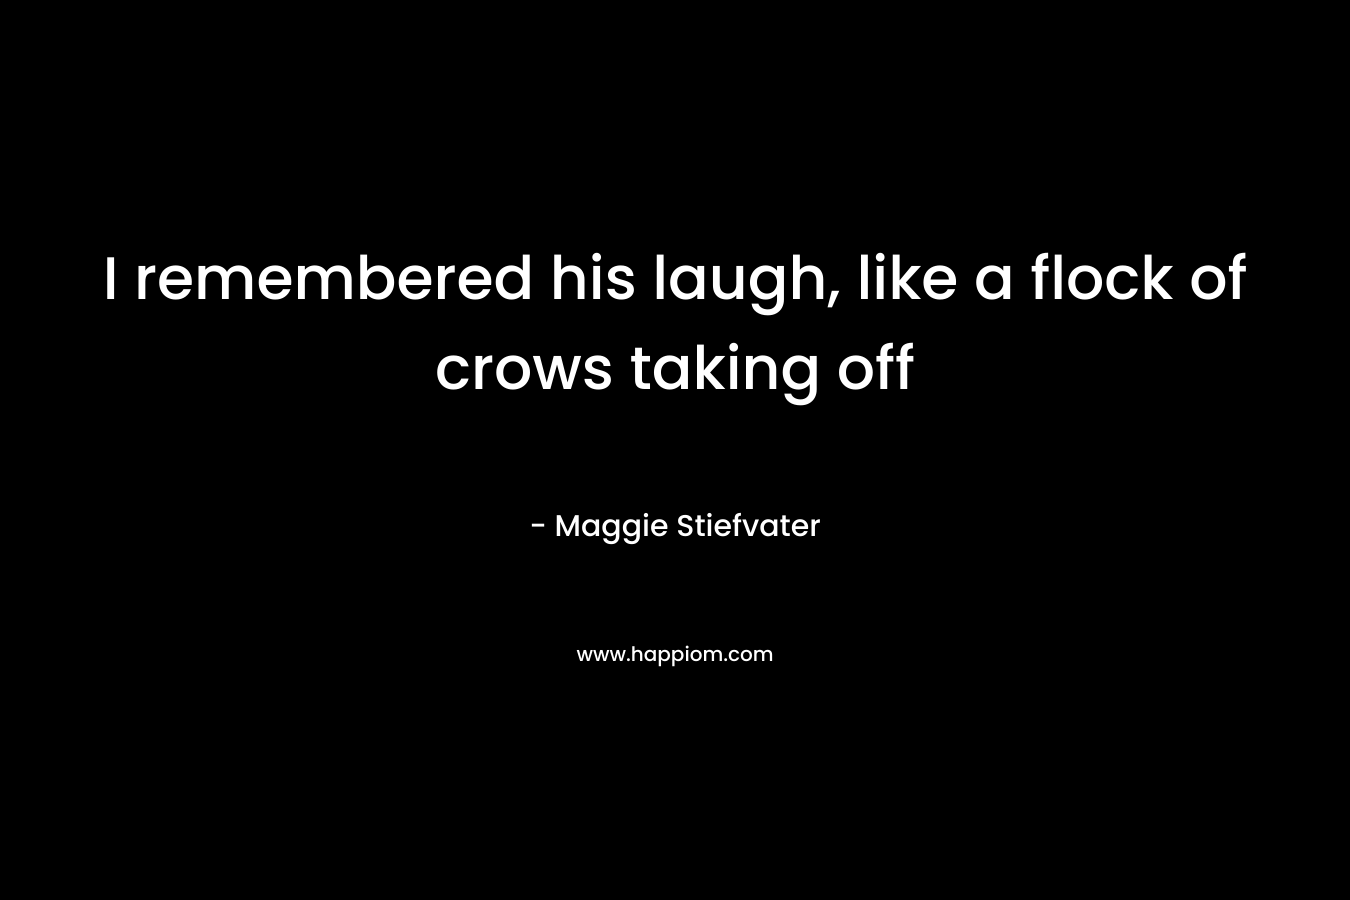 I remembered his laugh, like a flock of crows taking off – Maggie Stiefvater